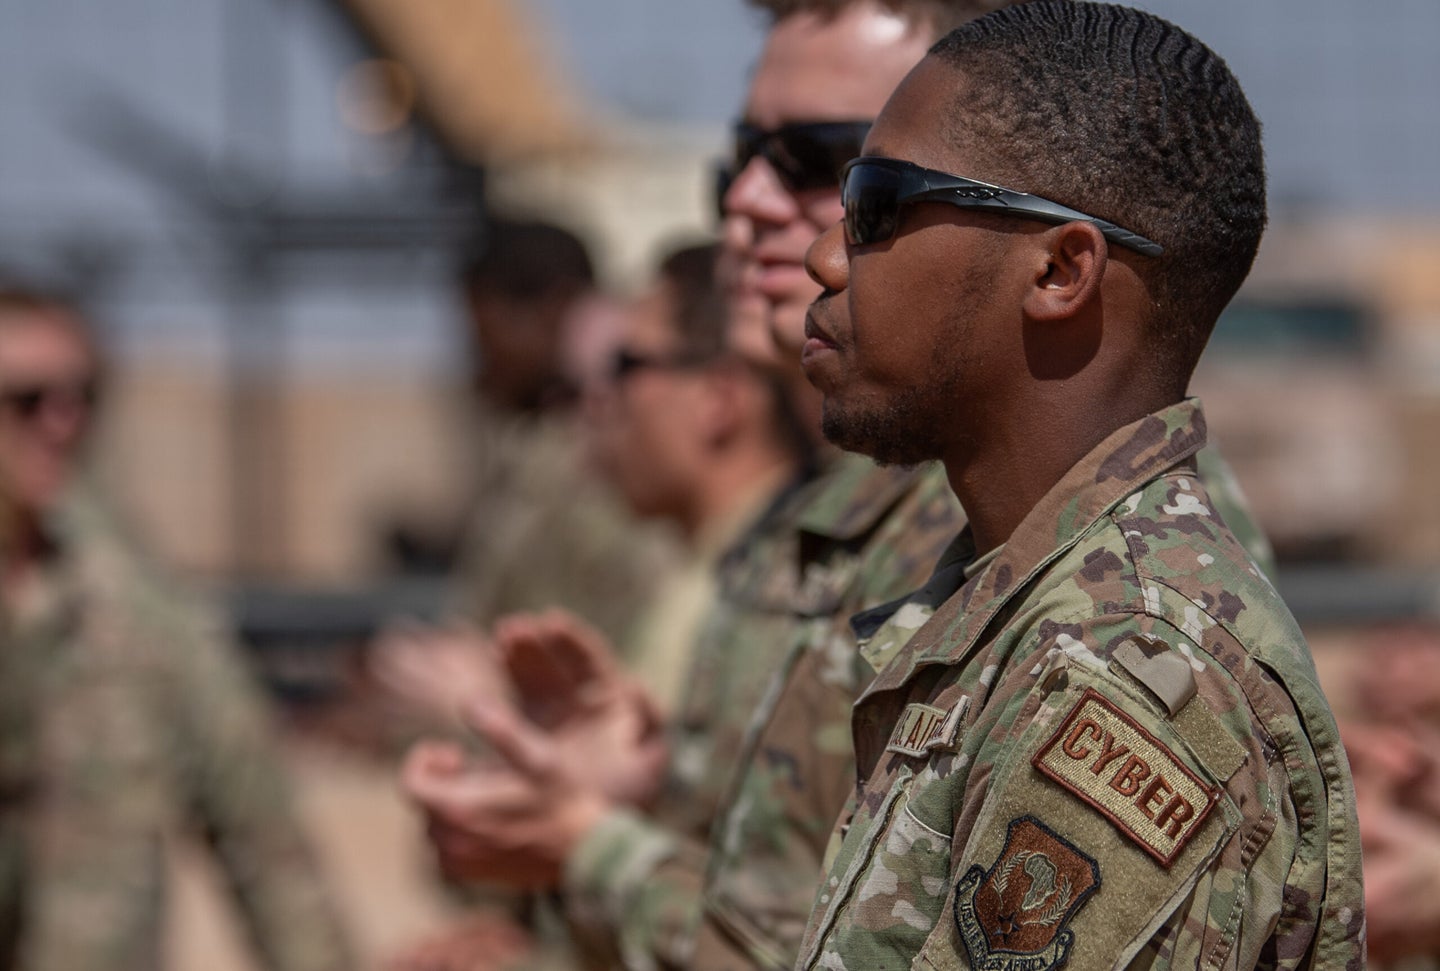 The U.S. has cut almost half of its troop presence in Niger in West Africa, according to figures in a White House letter sent to Congress last week.
Photo by Tech. Sgt. Rose Gudex.